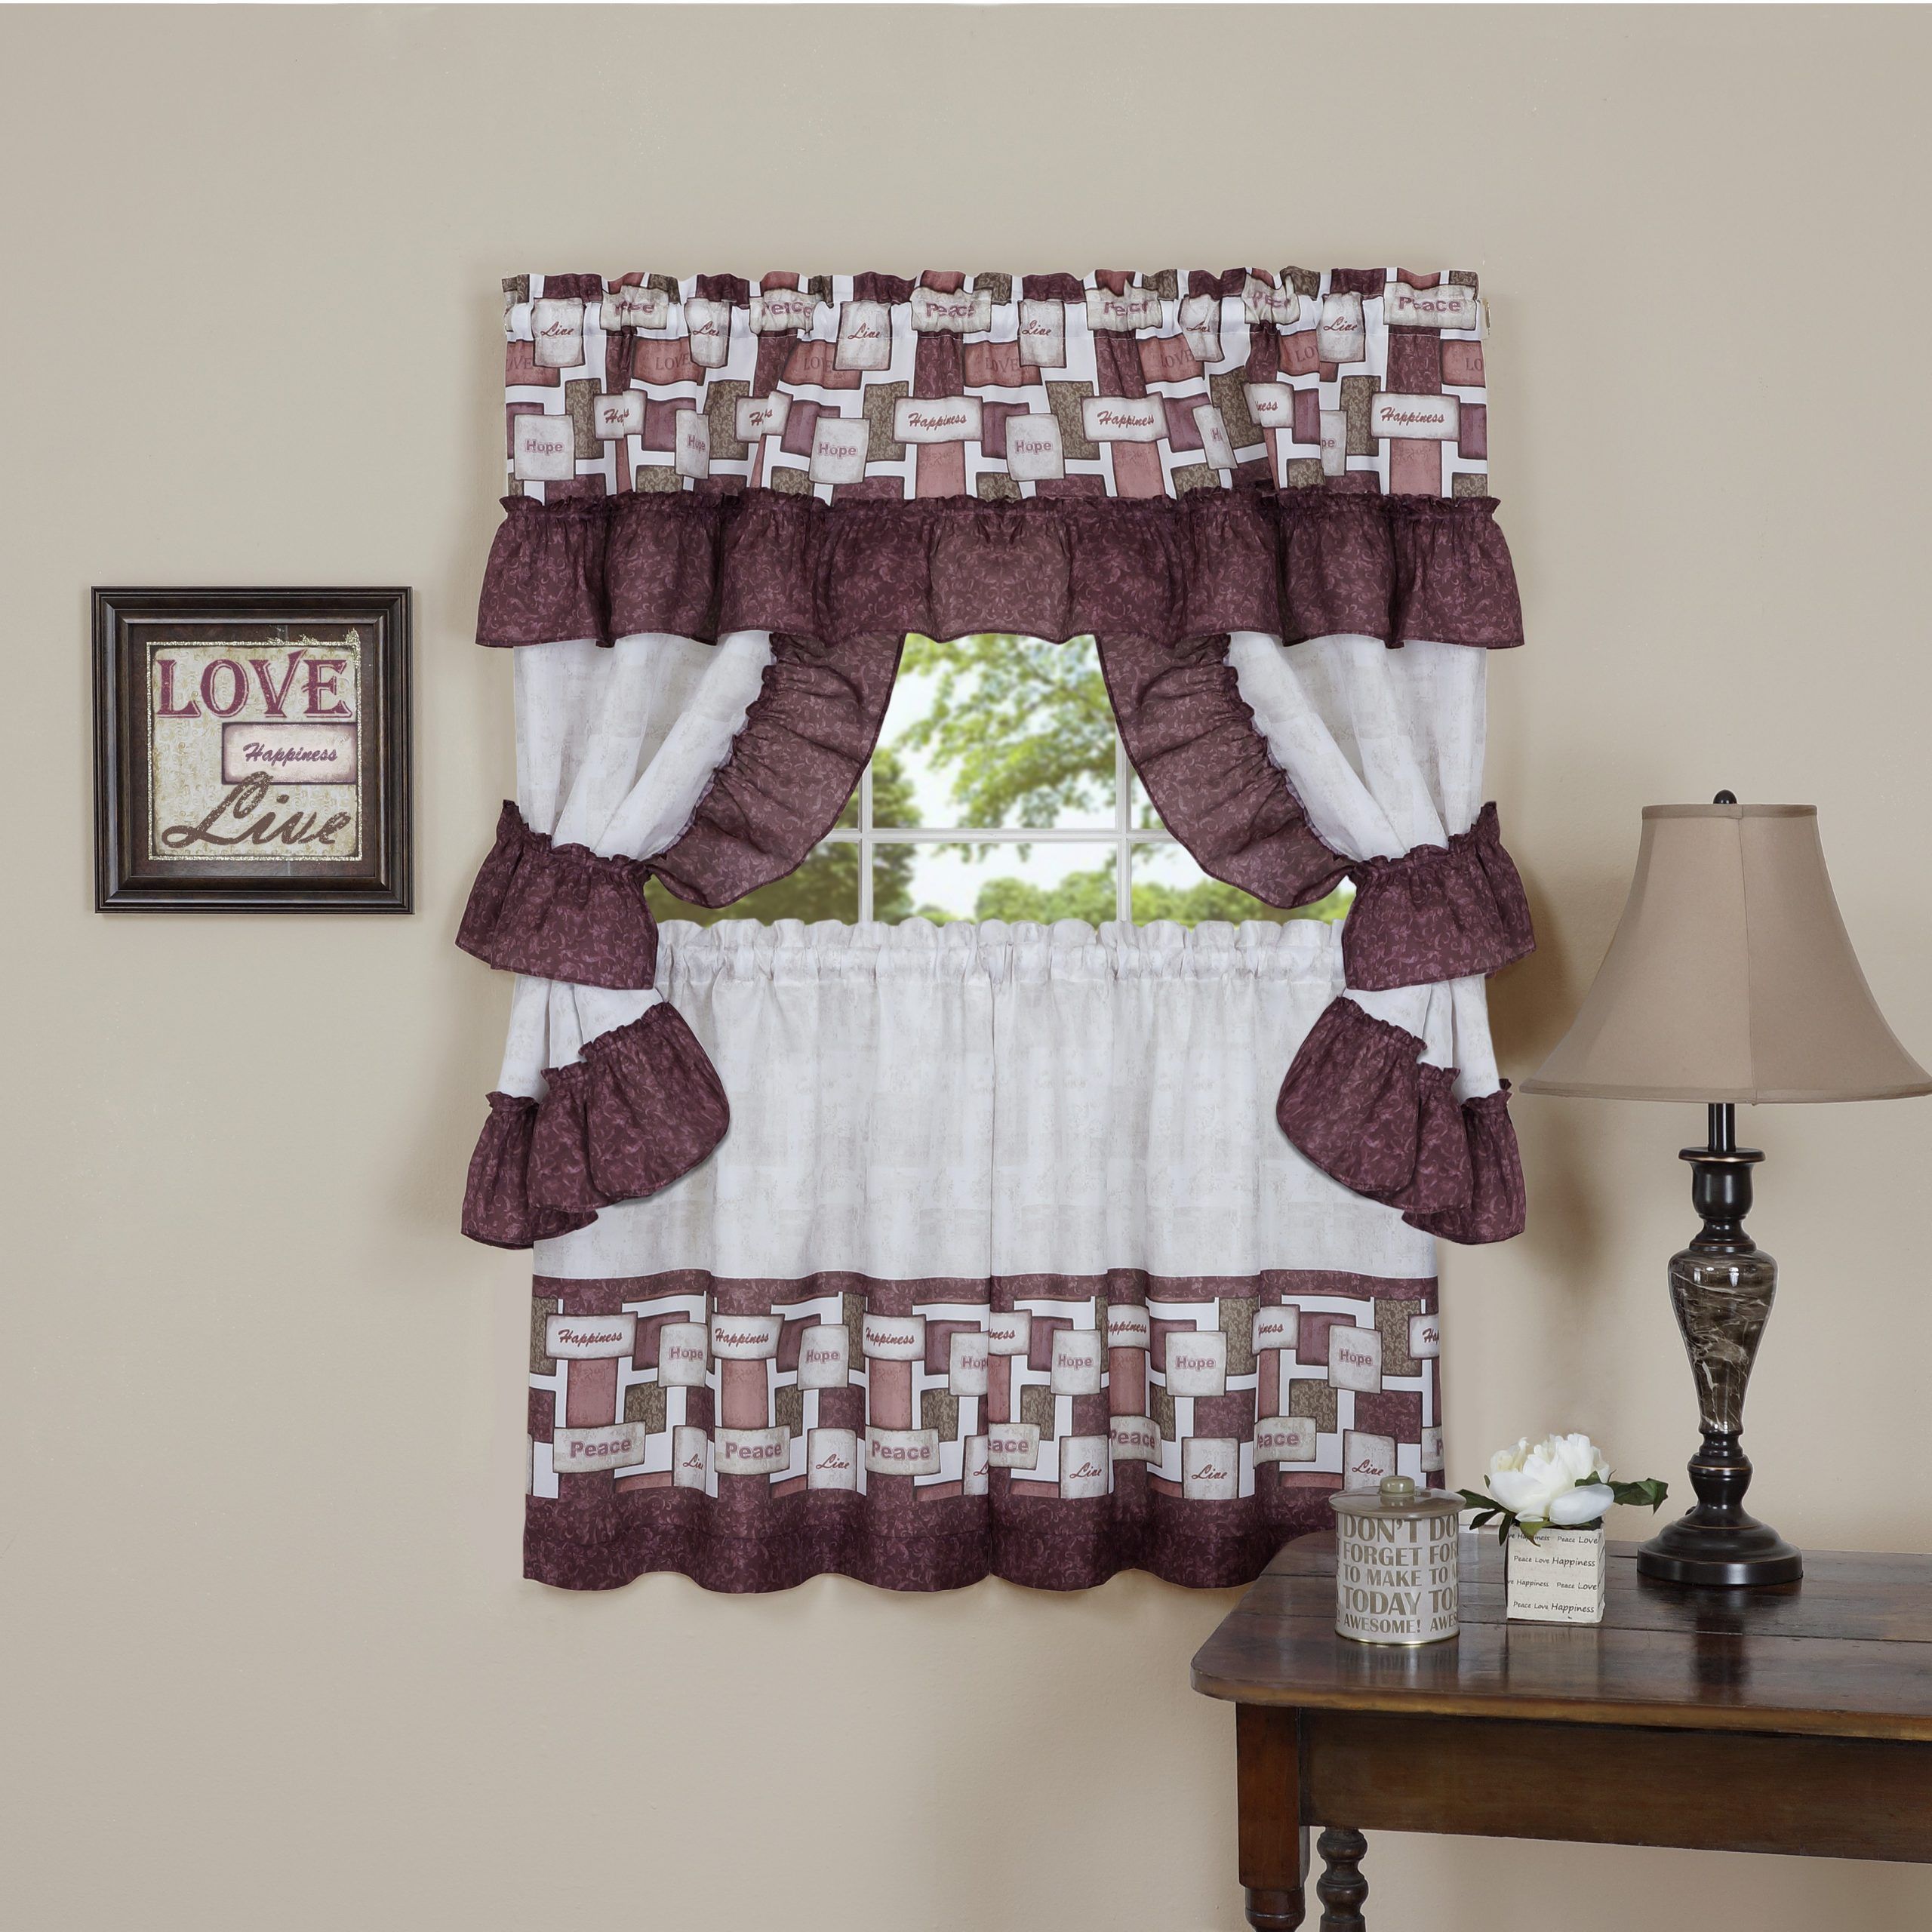 Inspiration Printed Cottage Set – Printed Cottage Sets In Top Of The Morning Printed Tailored Cottage Curtain Tier Sets (View 9 of 20)